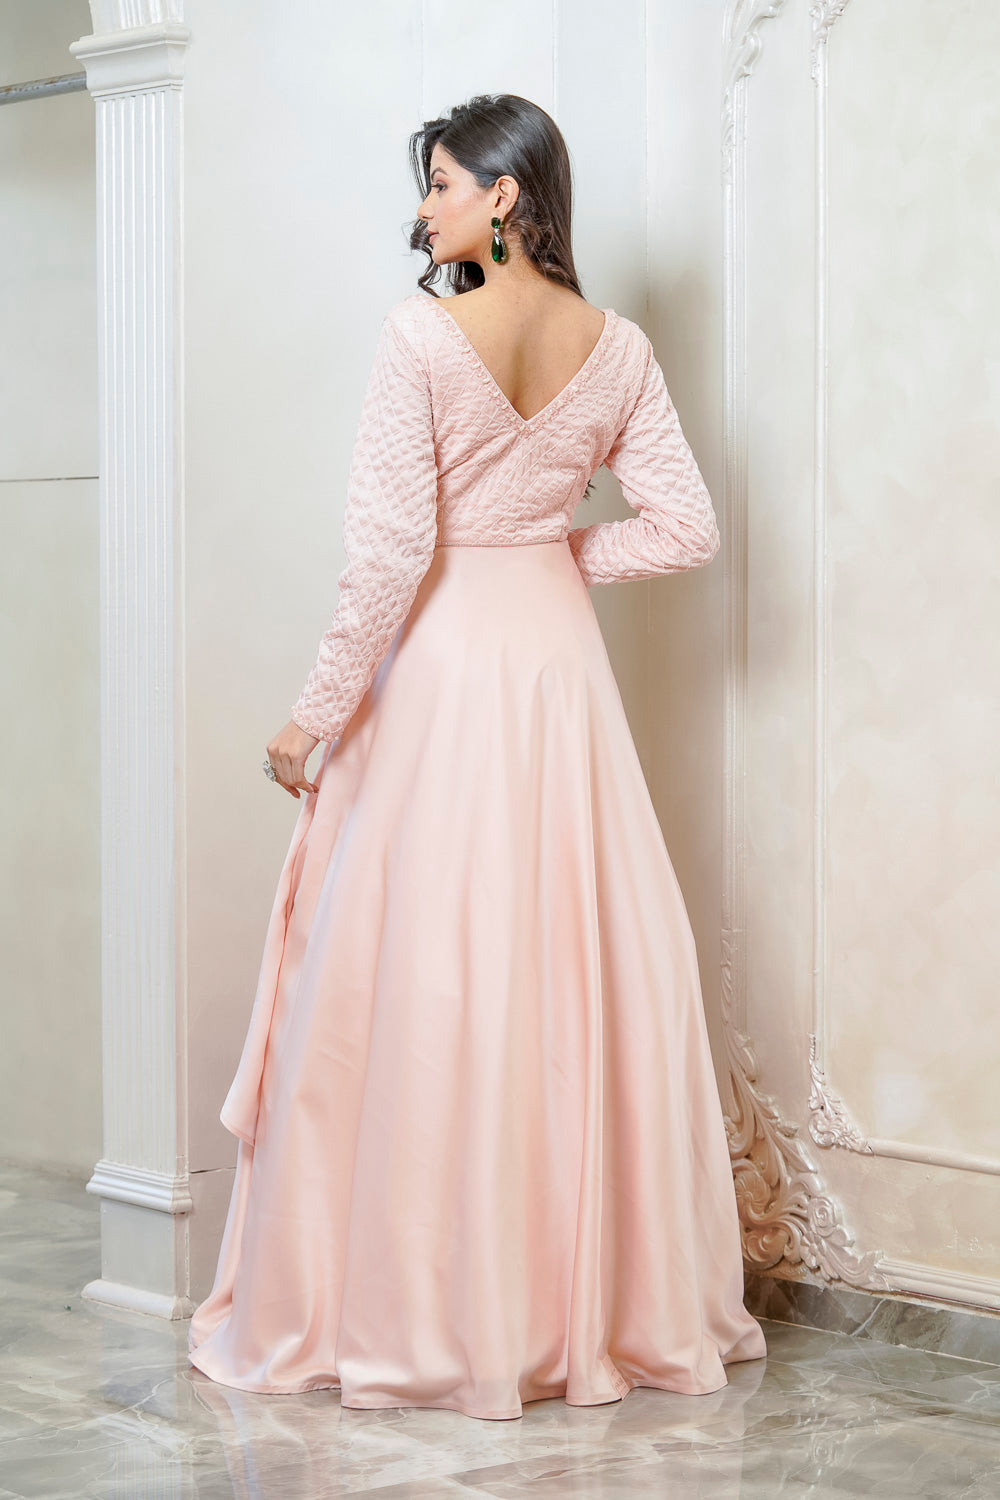 Designer and Stylish Silk Gown Dress In Light Pink Color - Dmv15158